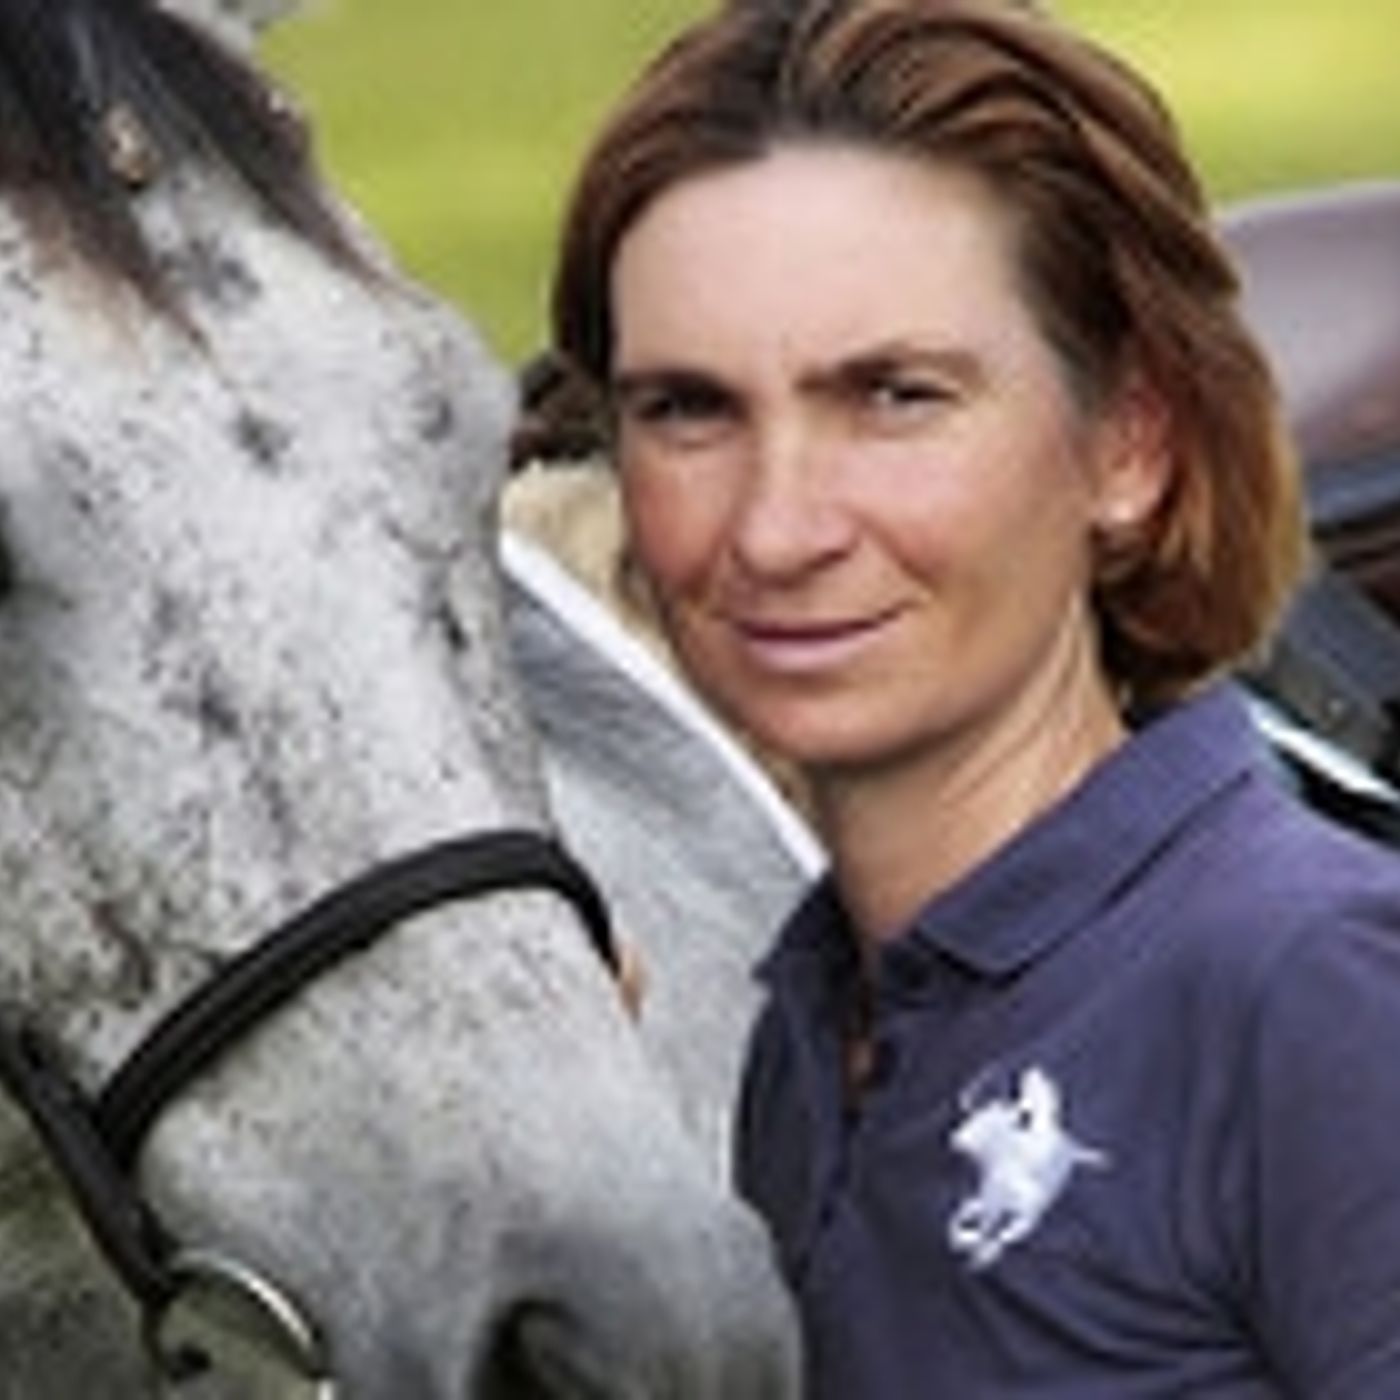 HorseSense Episode 8 - Overcome your riding fears with Australia's number 1 equestrian success mindset coach Tanja Mitton